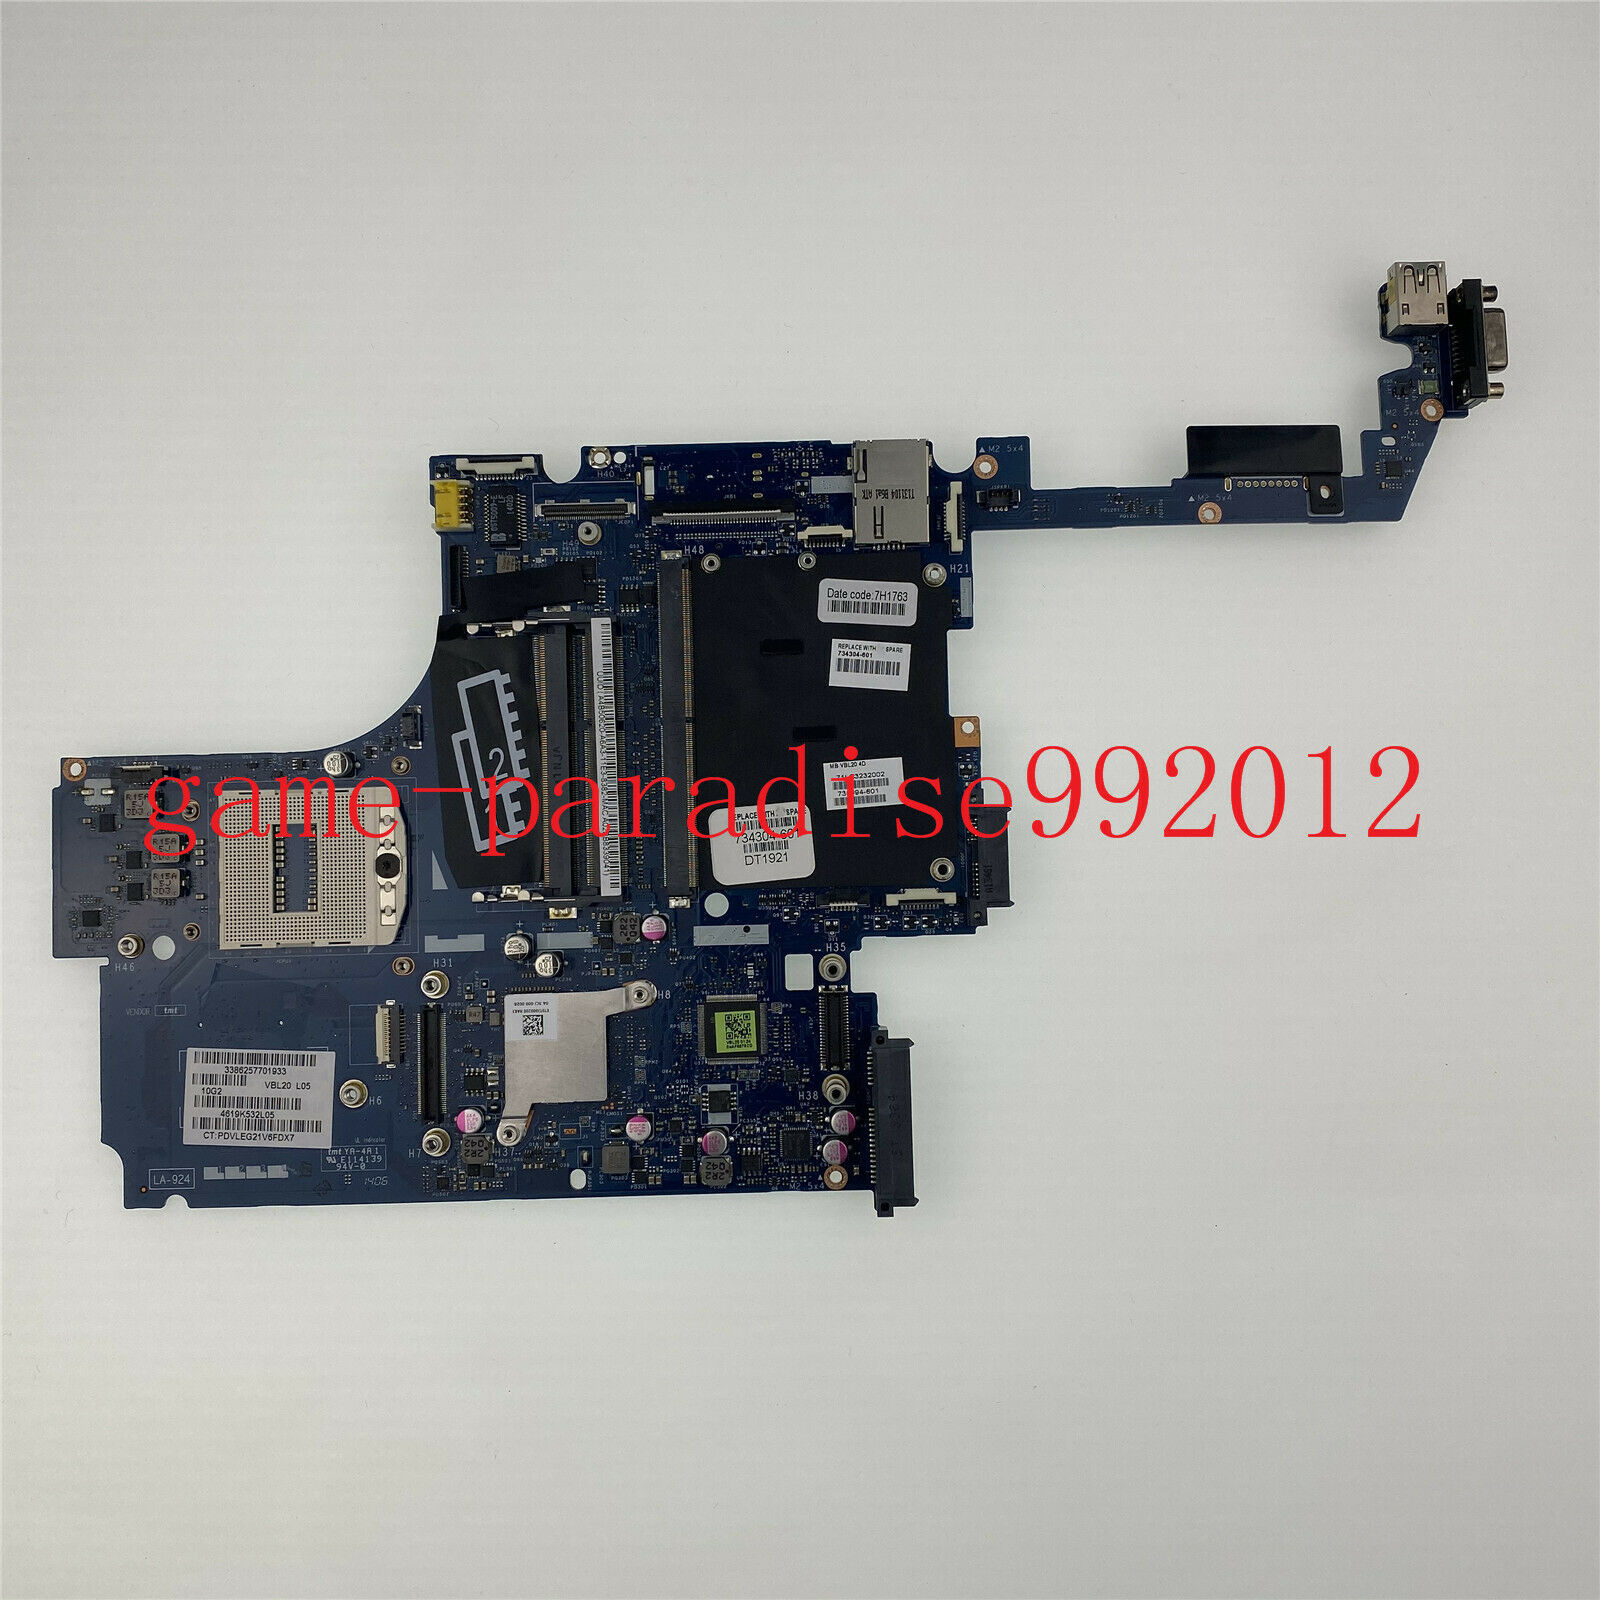 For HP ZBOOK 15 System Board Intel QM87 734304-601 laptop motherboard tested OK Brand: HP Memory Type: DDR3